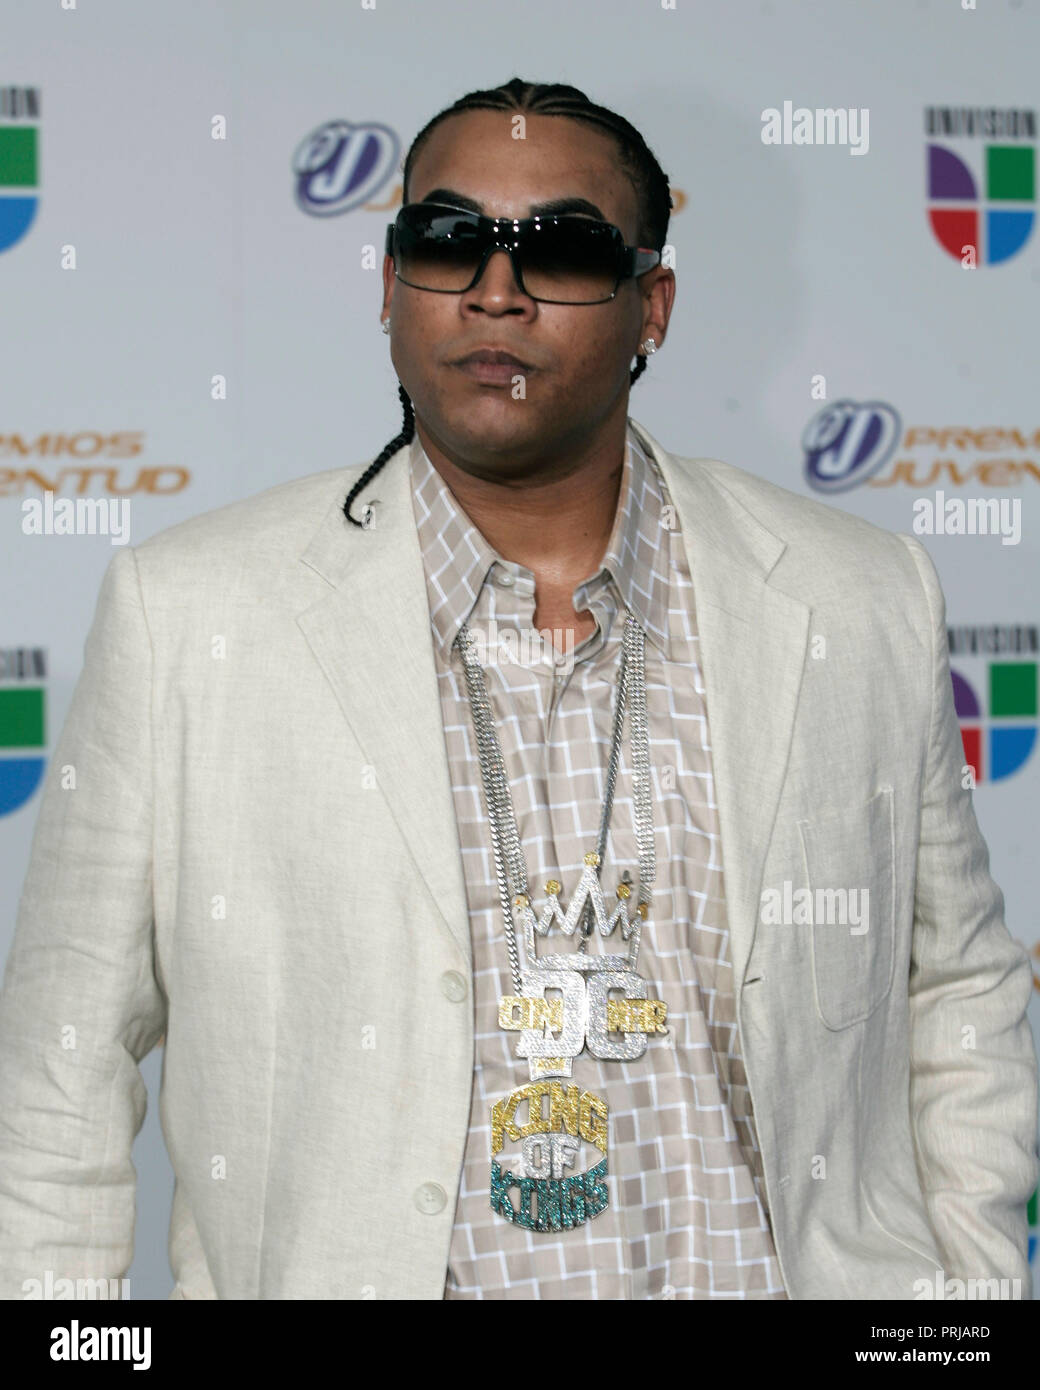 Don Omar arrives on the red carpet for the 2006 Premios Juventud Awards at the University of Miami BankUnited Center in Coral Gables, Florida on July 13, 2006. Stock Photo